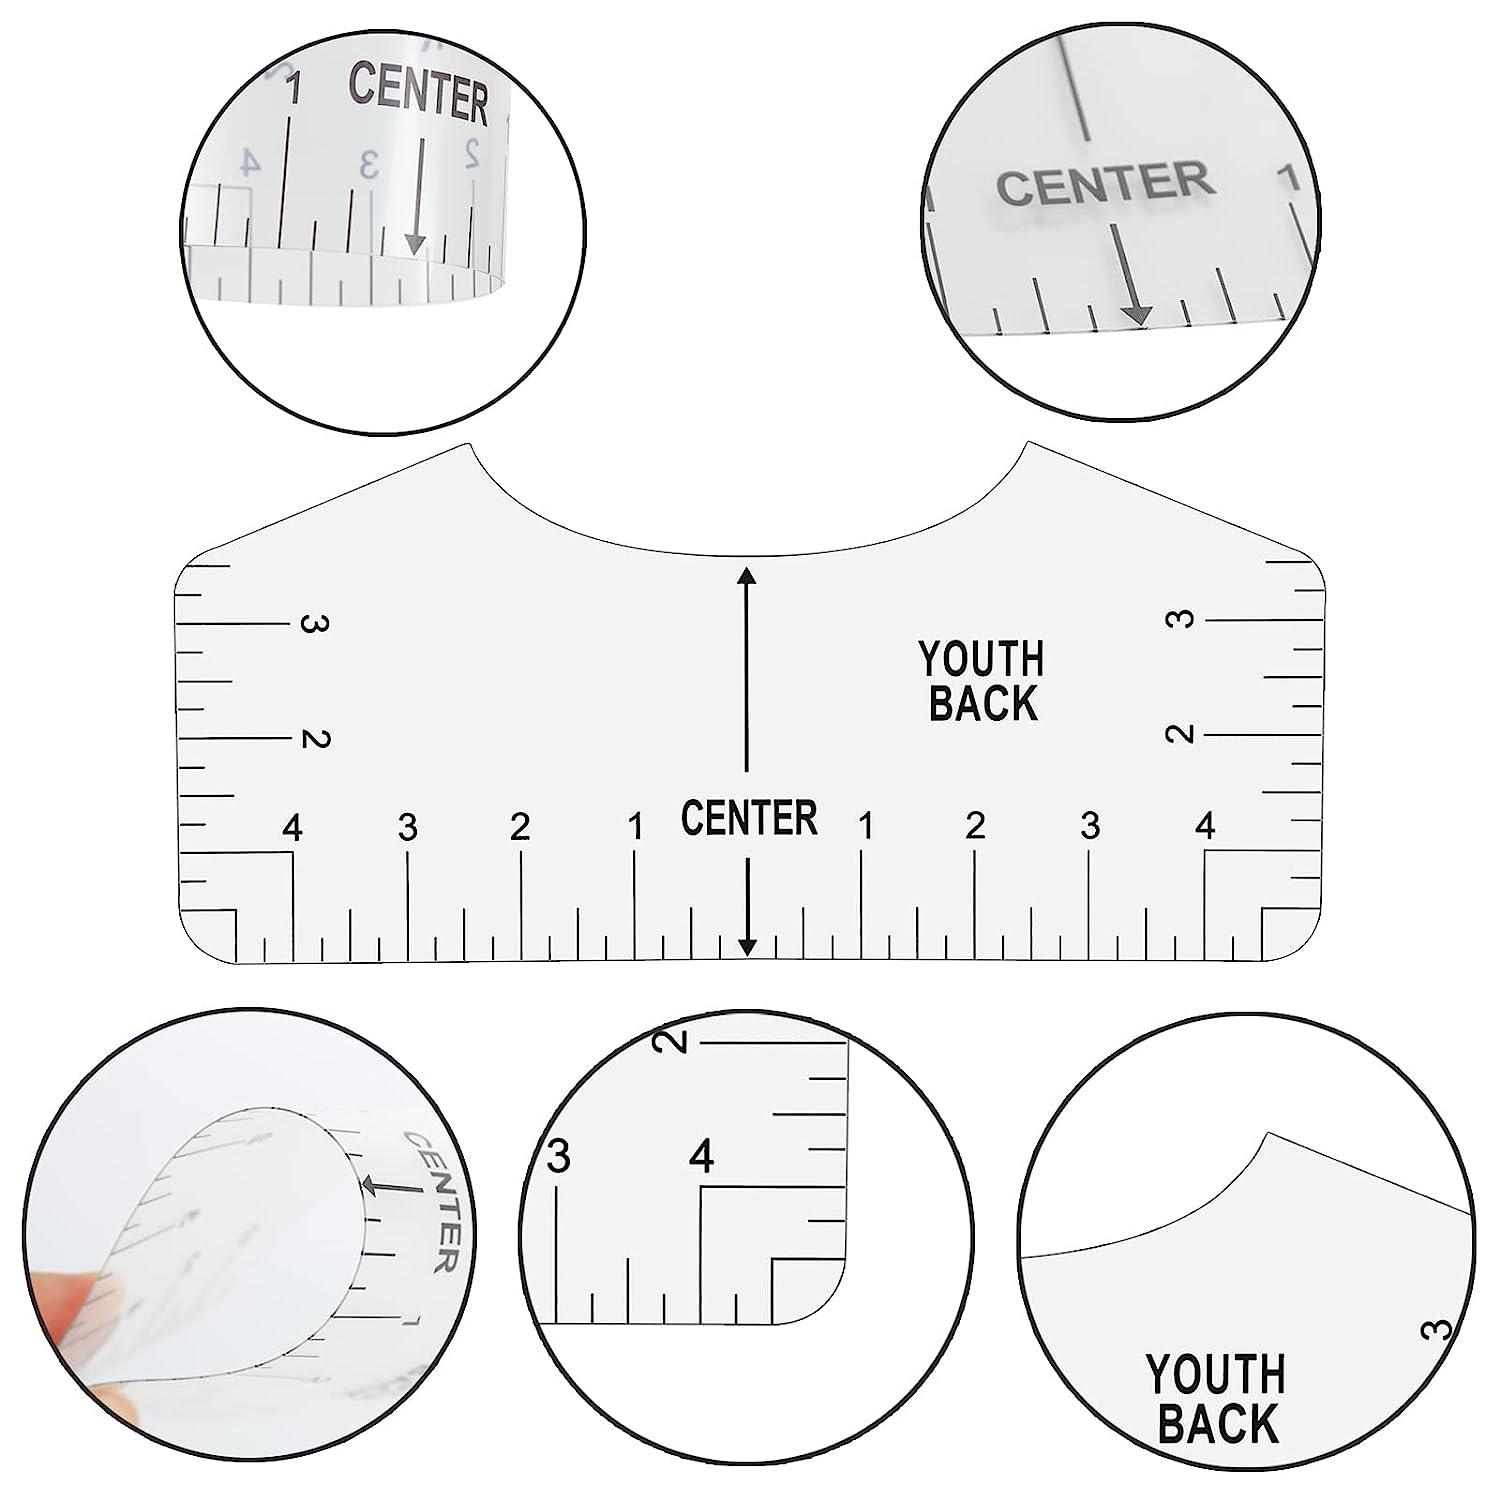 T-Shirt Alignment Tool SVG and PDF Files Graphic by ArtWorks